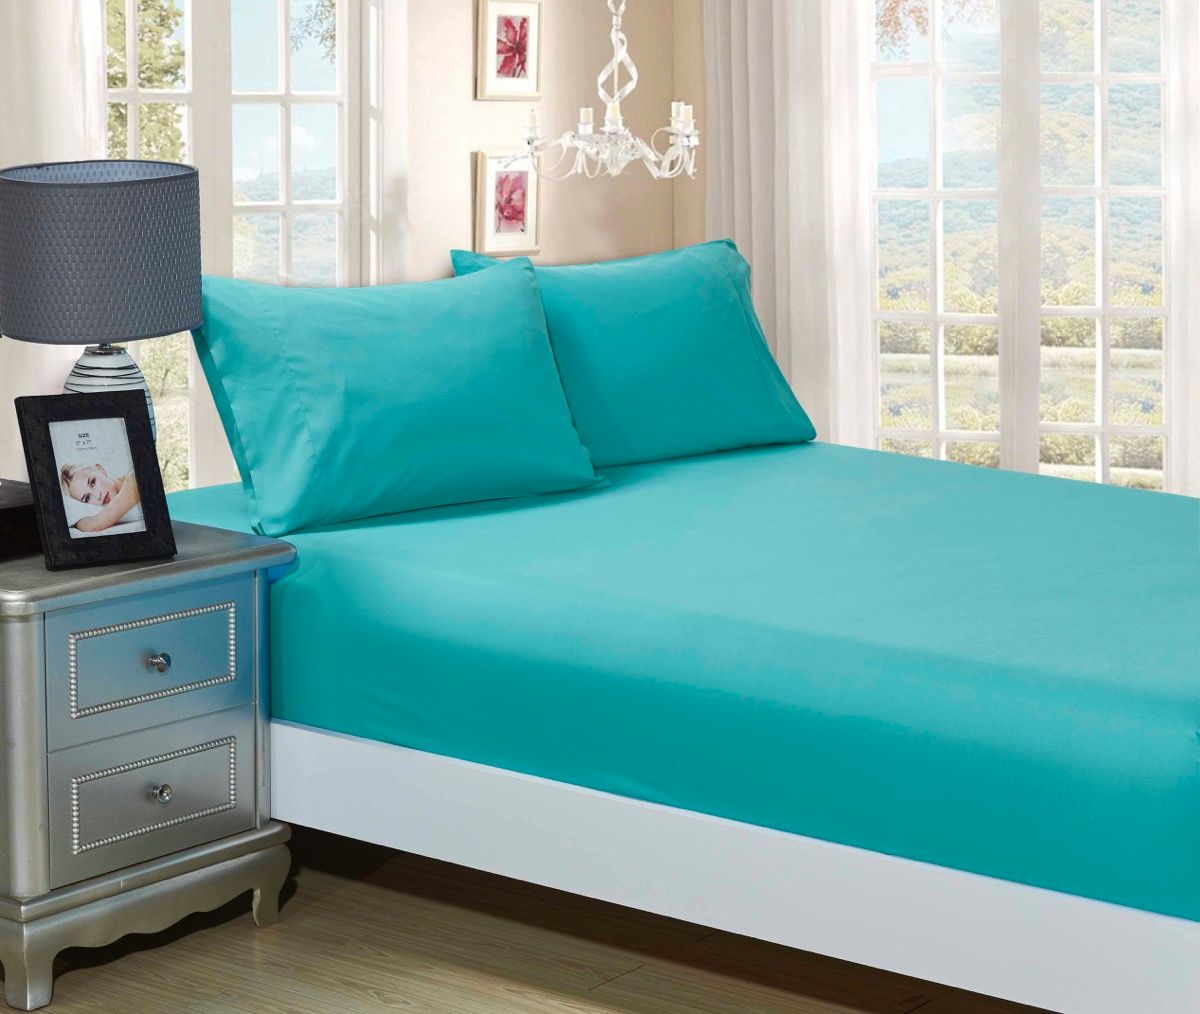 Super Soft 3-Piece Double Size Bed Fitted Sheet & 2 Pillowcases Set - Teal